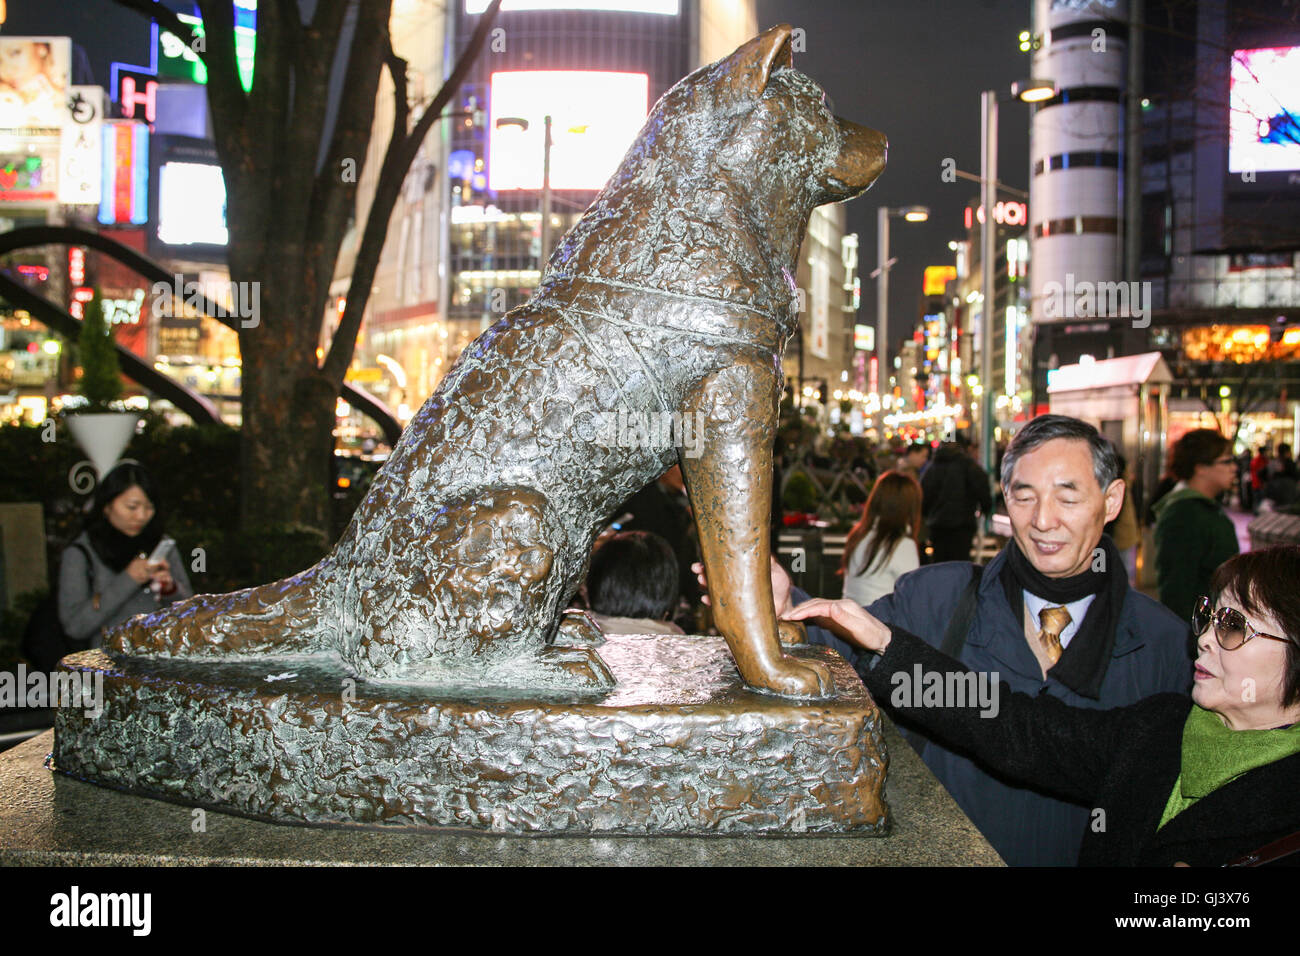 The most famous dog in Tokyo is a loyal Akita called Hachiko who was owned by Professor Ueno in the 1920's.  Hachiko used to wait here.Japan,Japanese. Stock Photo